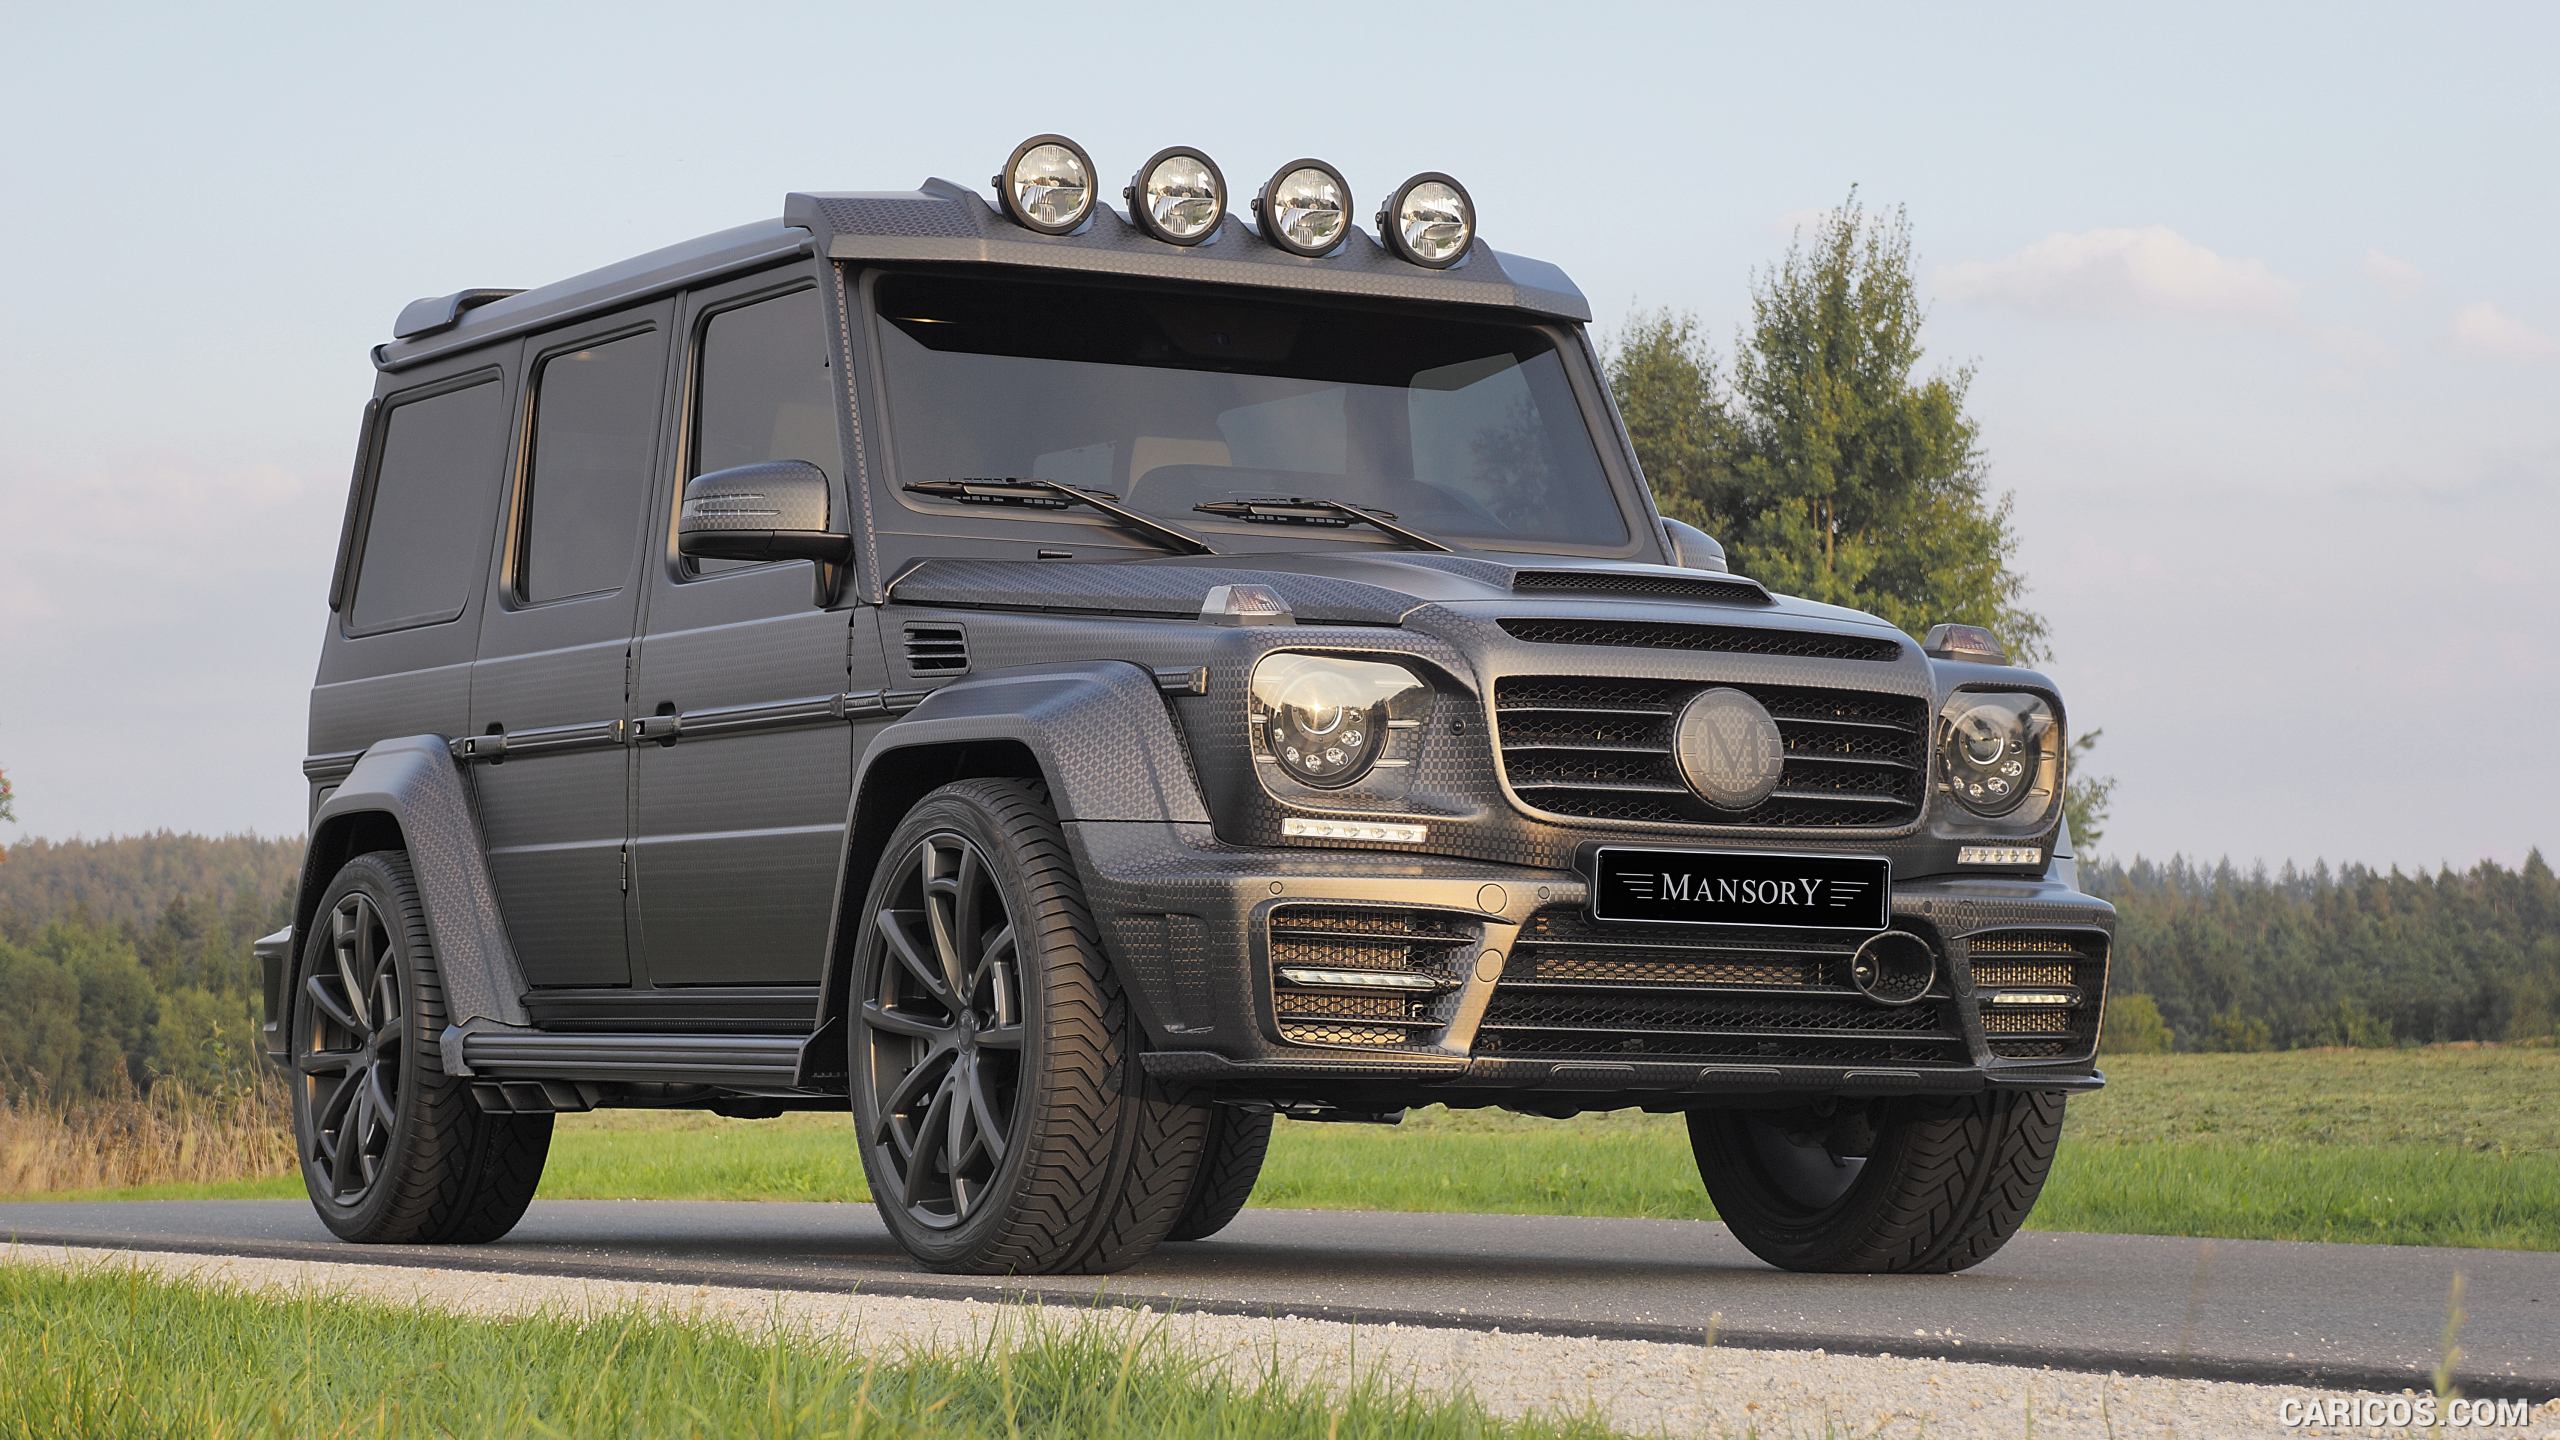 2016 MANSORY GRONOS Black Edition based on Mercedes G63 AMG                 - Front, #2 of 16